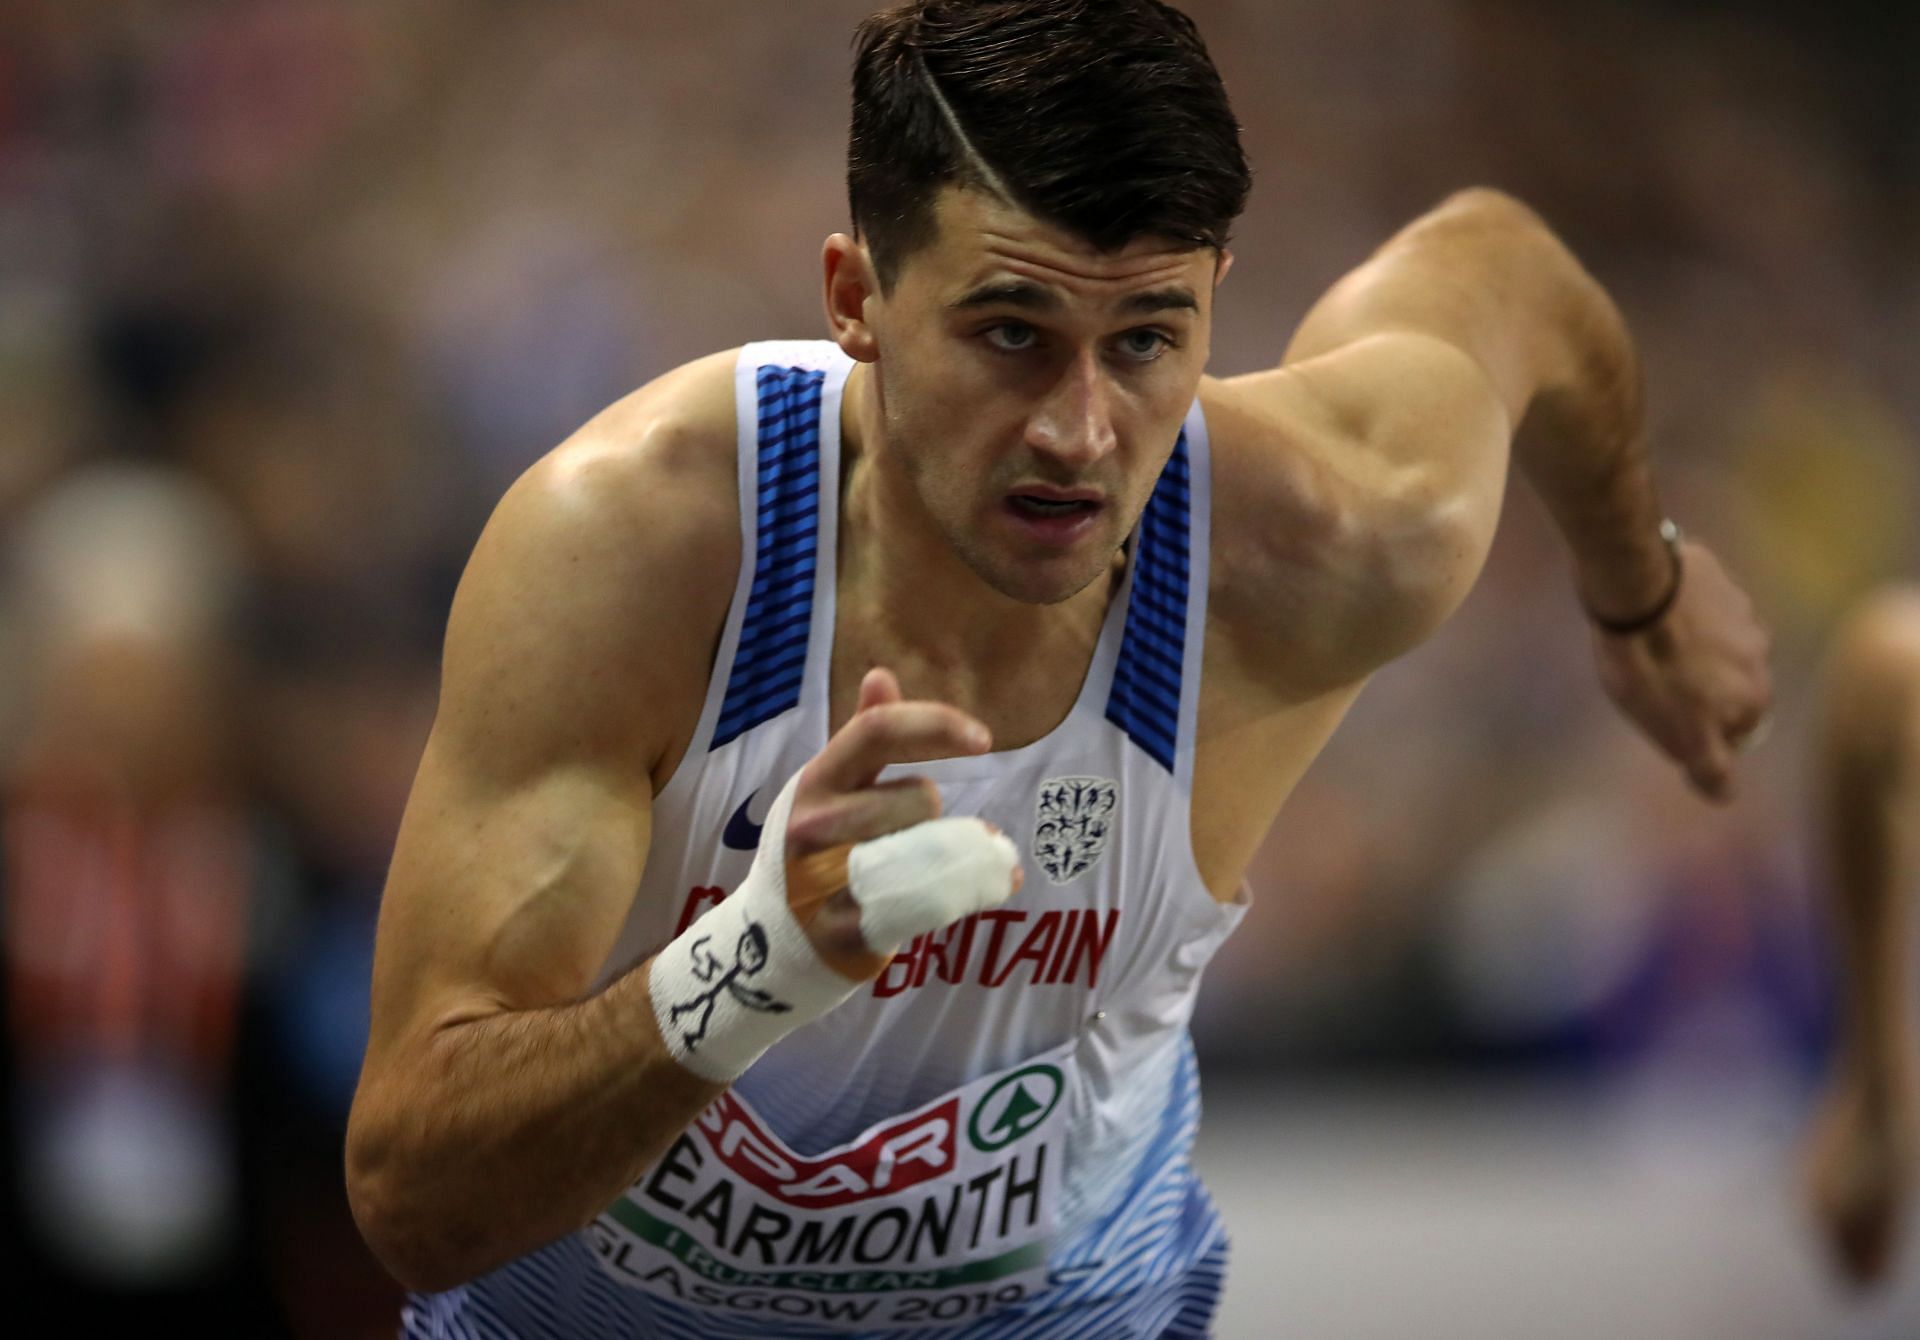 Guy Learmonth at the 2019 European Athletics Indoor Championships.